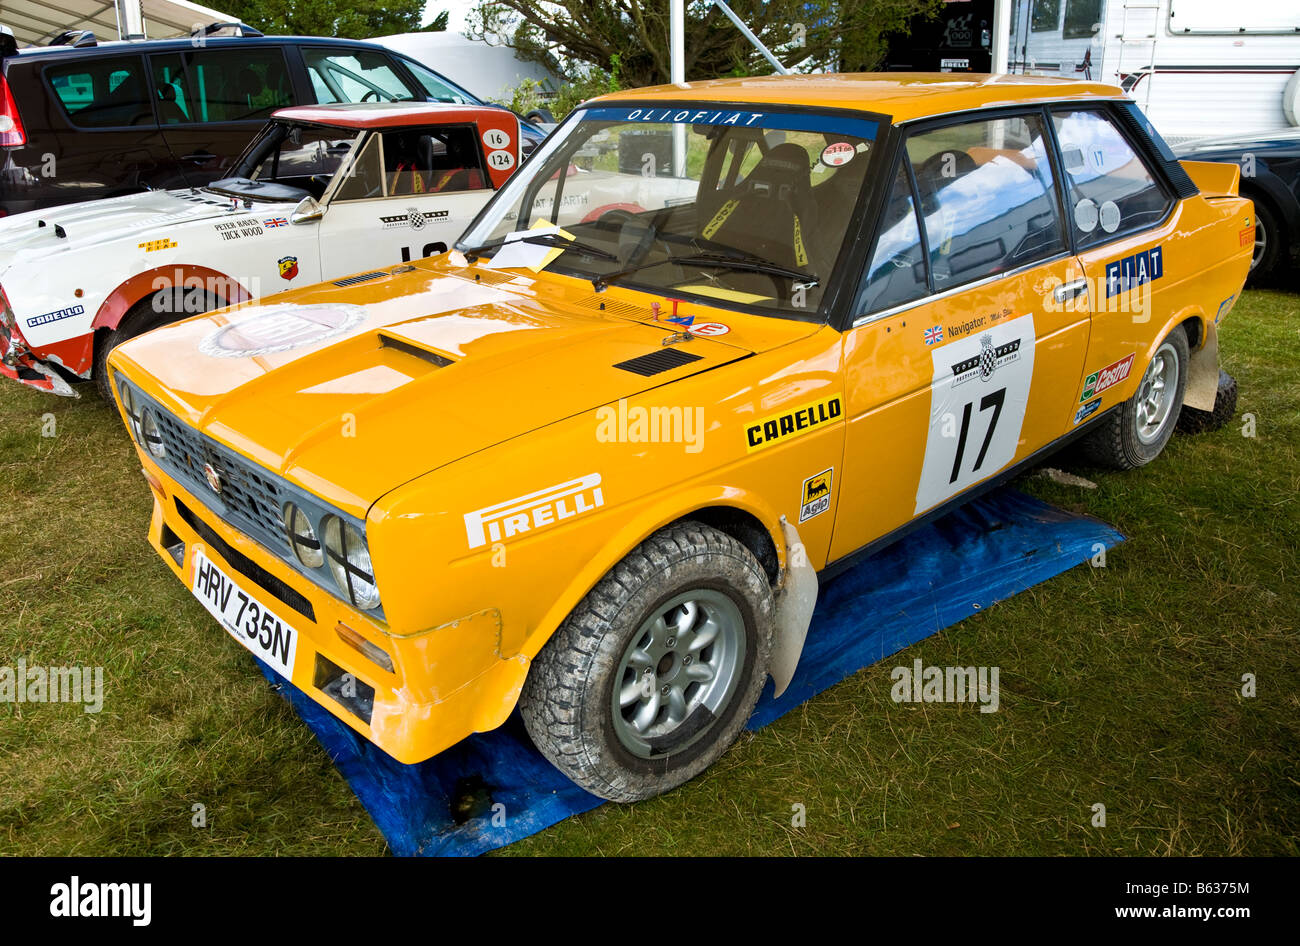 1975 Fiat 131 Abarth rally car in the paddock at Goodwood Festival of Speed, Sussex, UK. Stock Photo